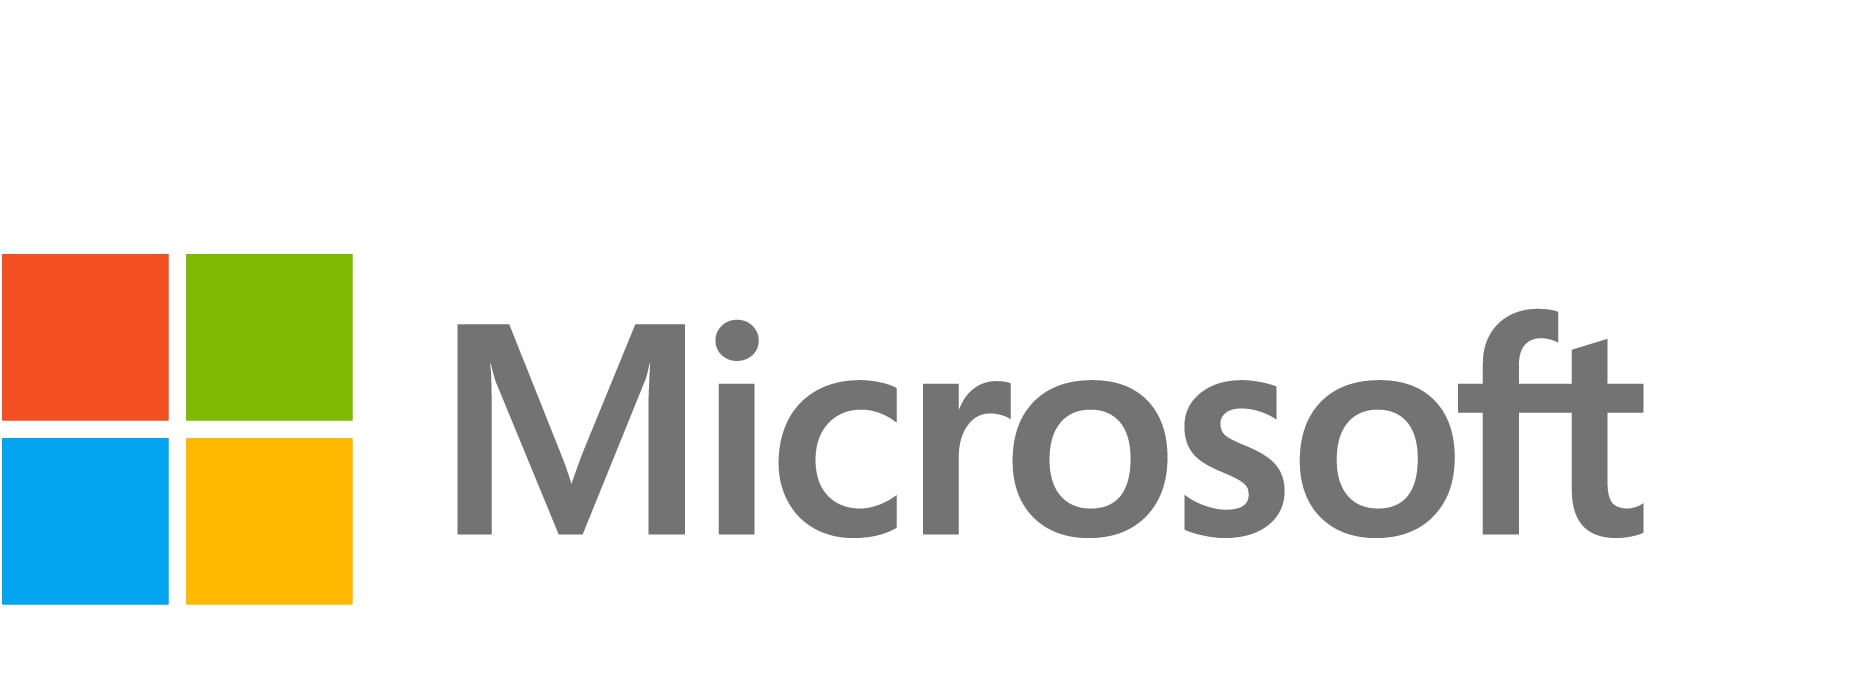 Microsoft 365 Business Standard Software Subscription (Teams Included)